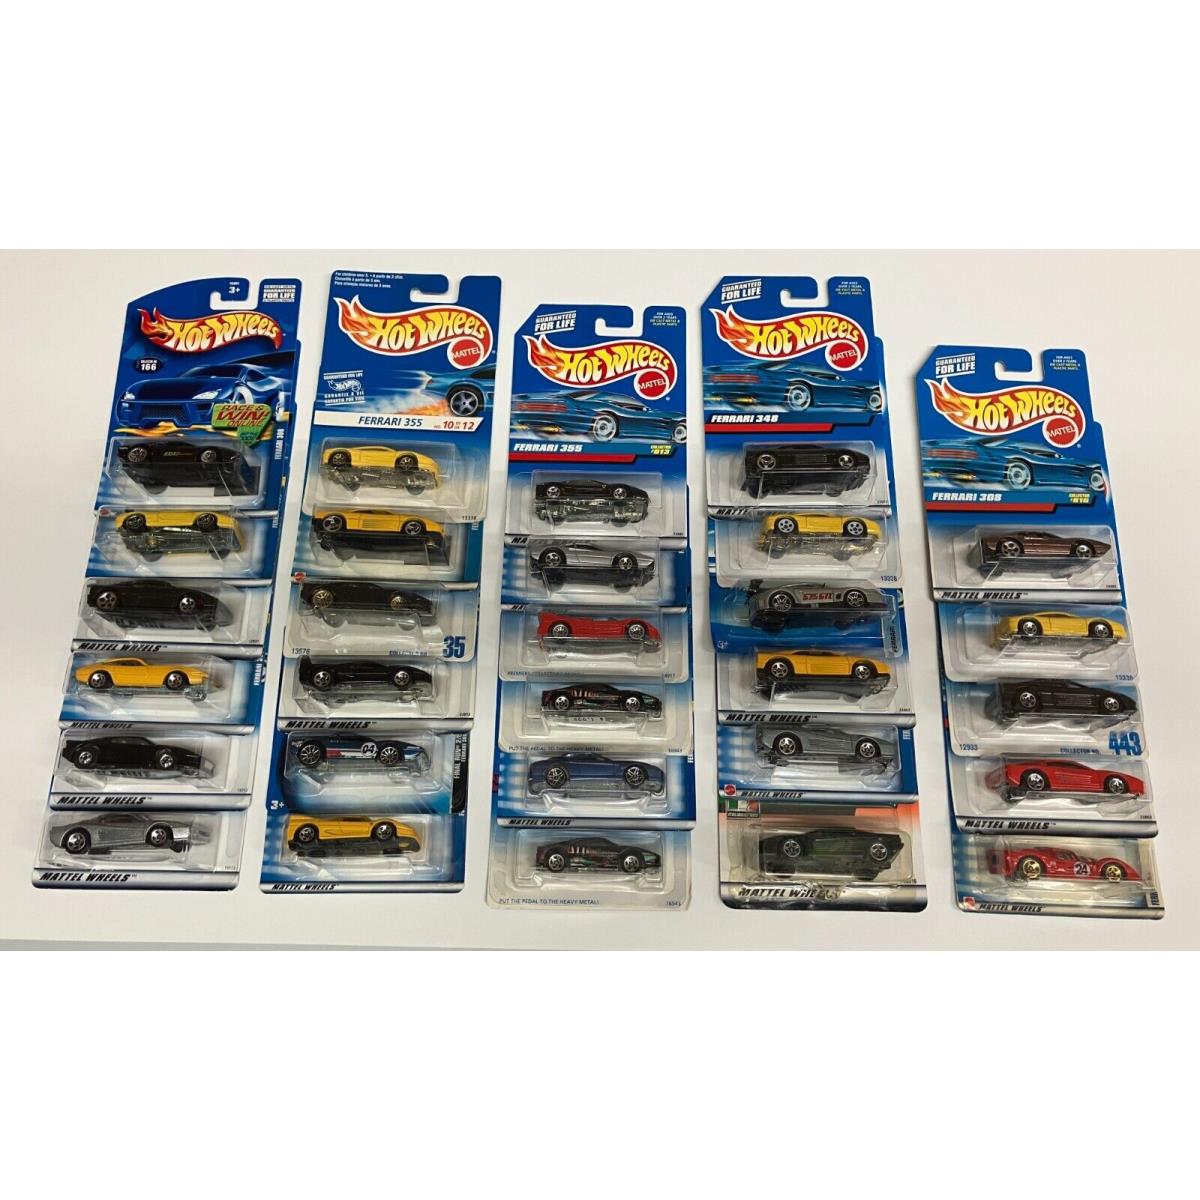 29 Different Hot Wheels Ferrari Die-cast Cars All Minty Condition